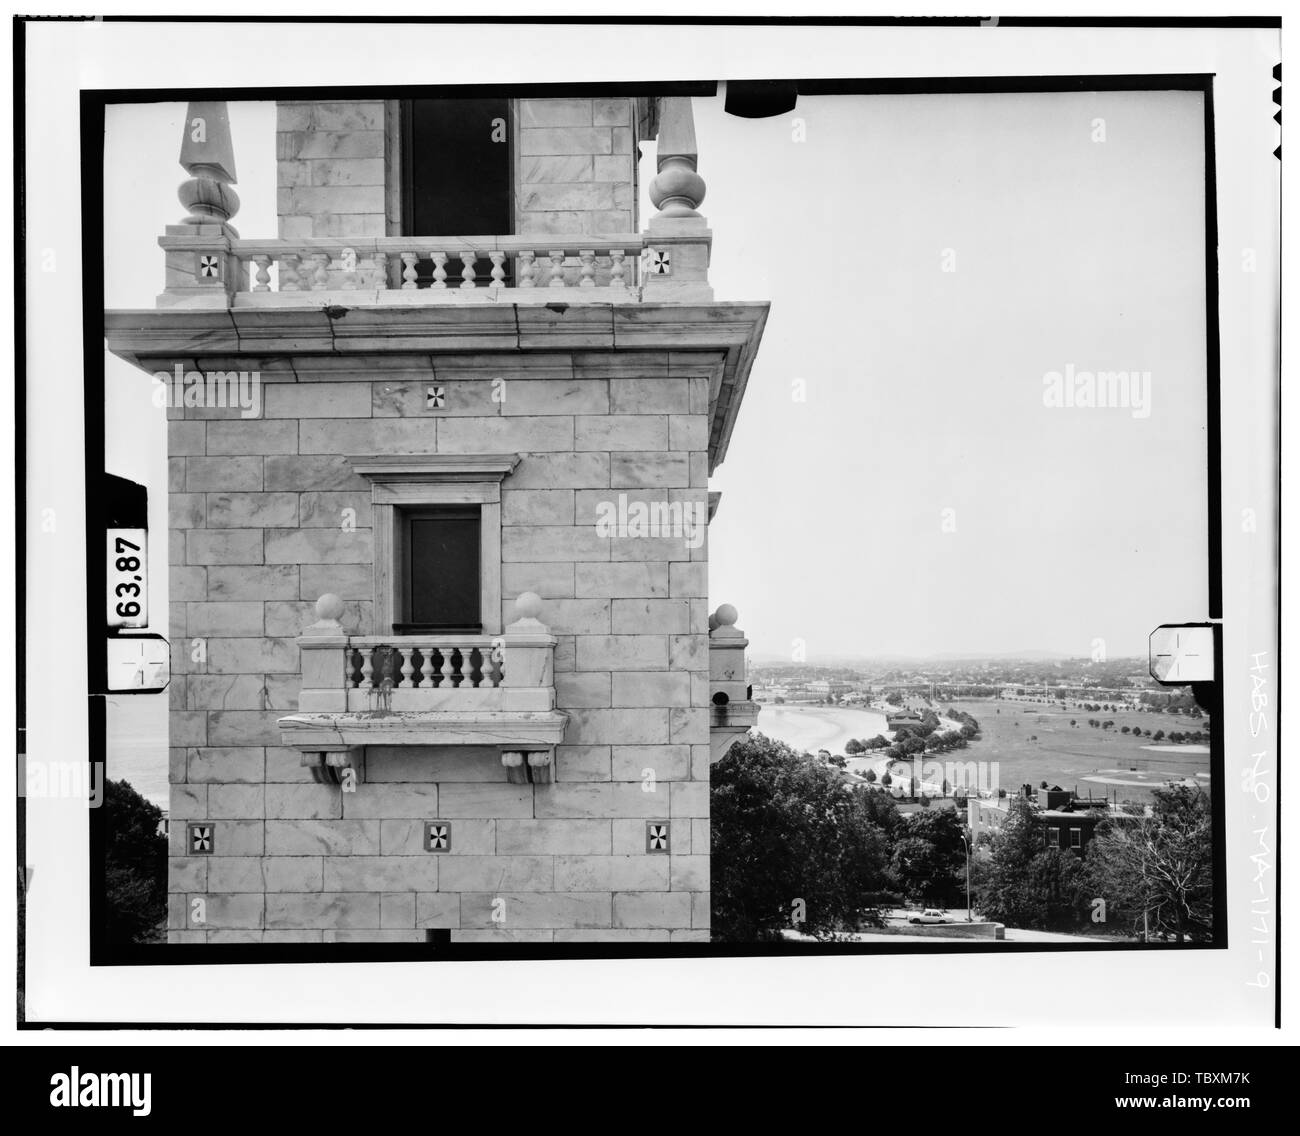 NORTH ELEVATION, LEVEL 3 Copy photograph of photogrammetric plate LCHABSGS11D1981N4L.  Dorchester Heights Monument, Thomas Park, Boston, Suffolk County, MA Peabody and Stearns Washington, George Burns, John A, field team Lawrence, Jeanne C, field team Alderson, Caroline R, field team Cronenberger, Richard J, project manager Graham, William J, field team Marsh, David T, field team Lowe, Jet, photographer Dennett, Muessig and Associates, Limited, photographer Taylor, Douglas R, delineator Schiller, Angela J, delineator Trumbull, Rebecca, delineator Stock Photo